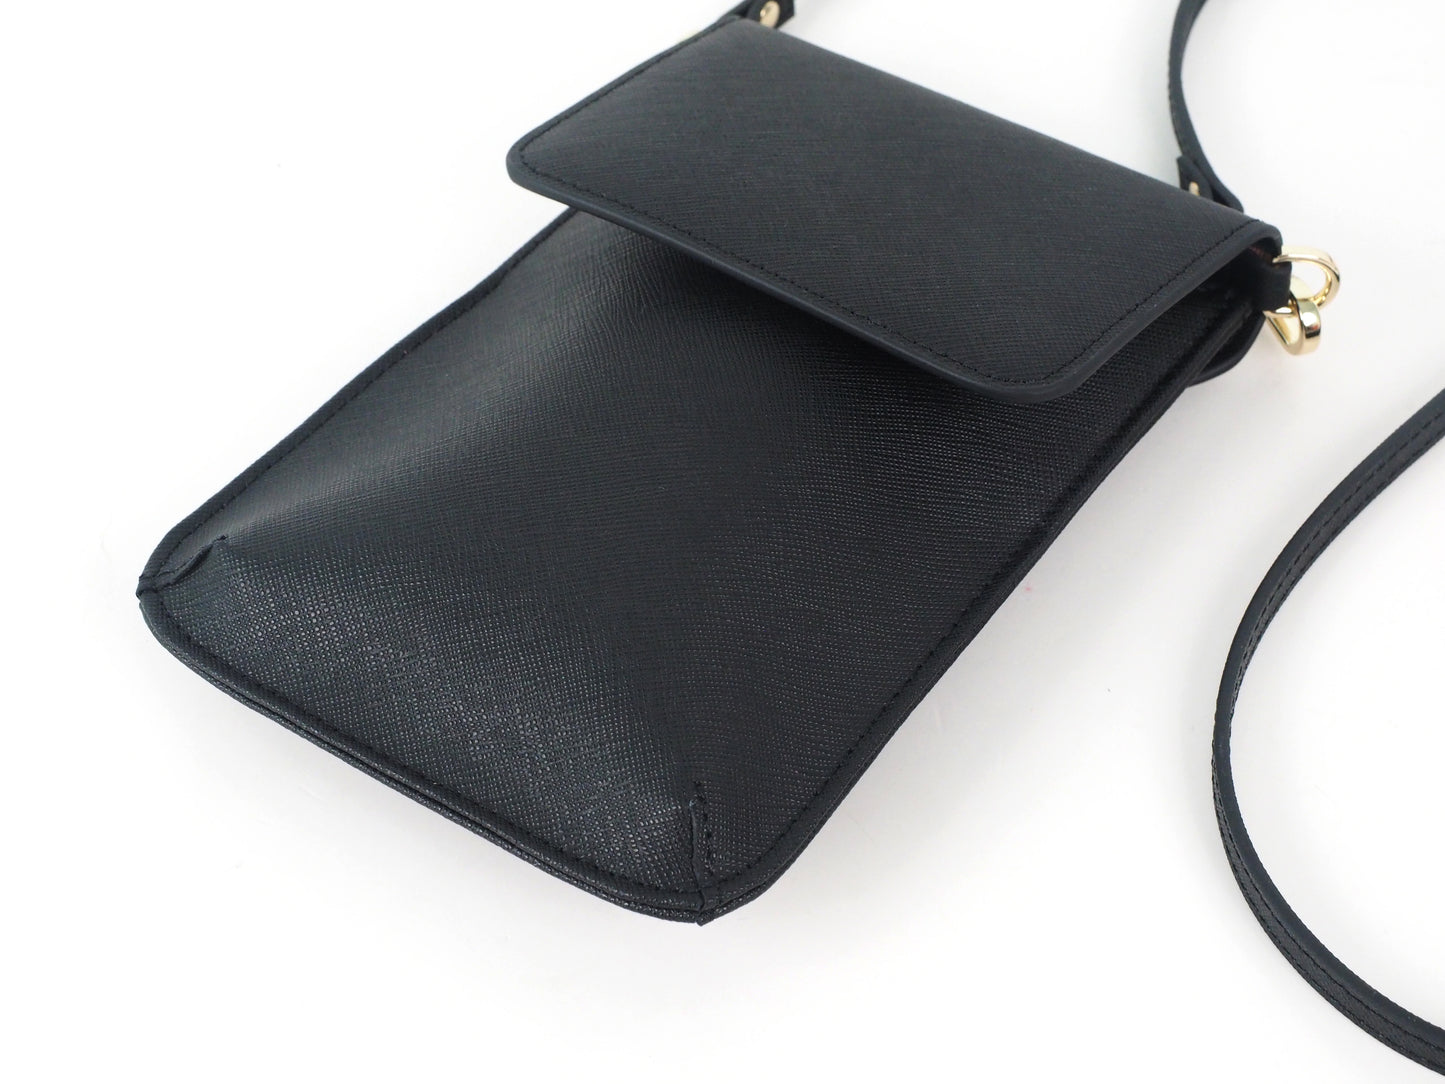 The Crossbody Phone Pouch